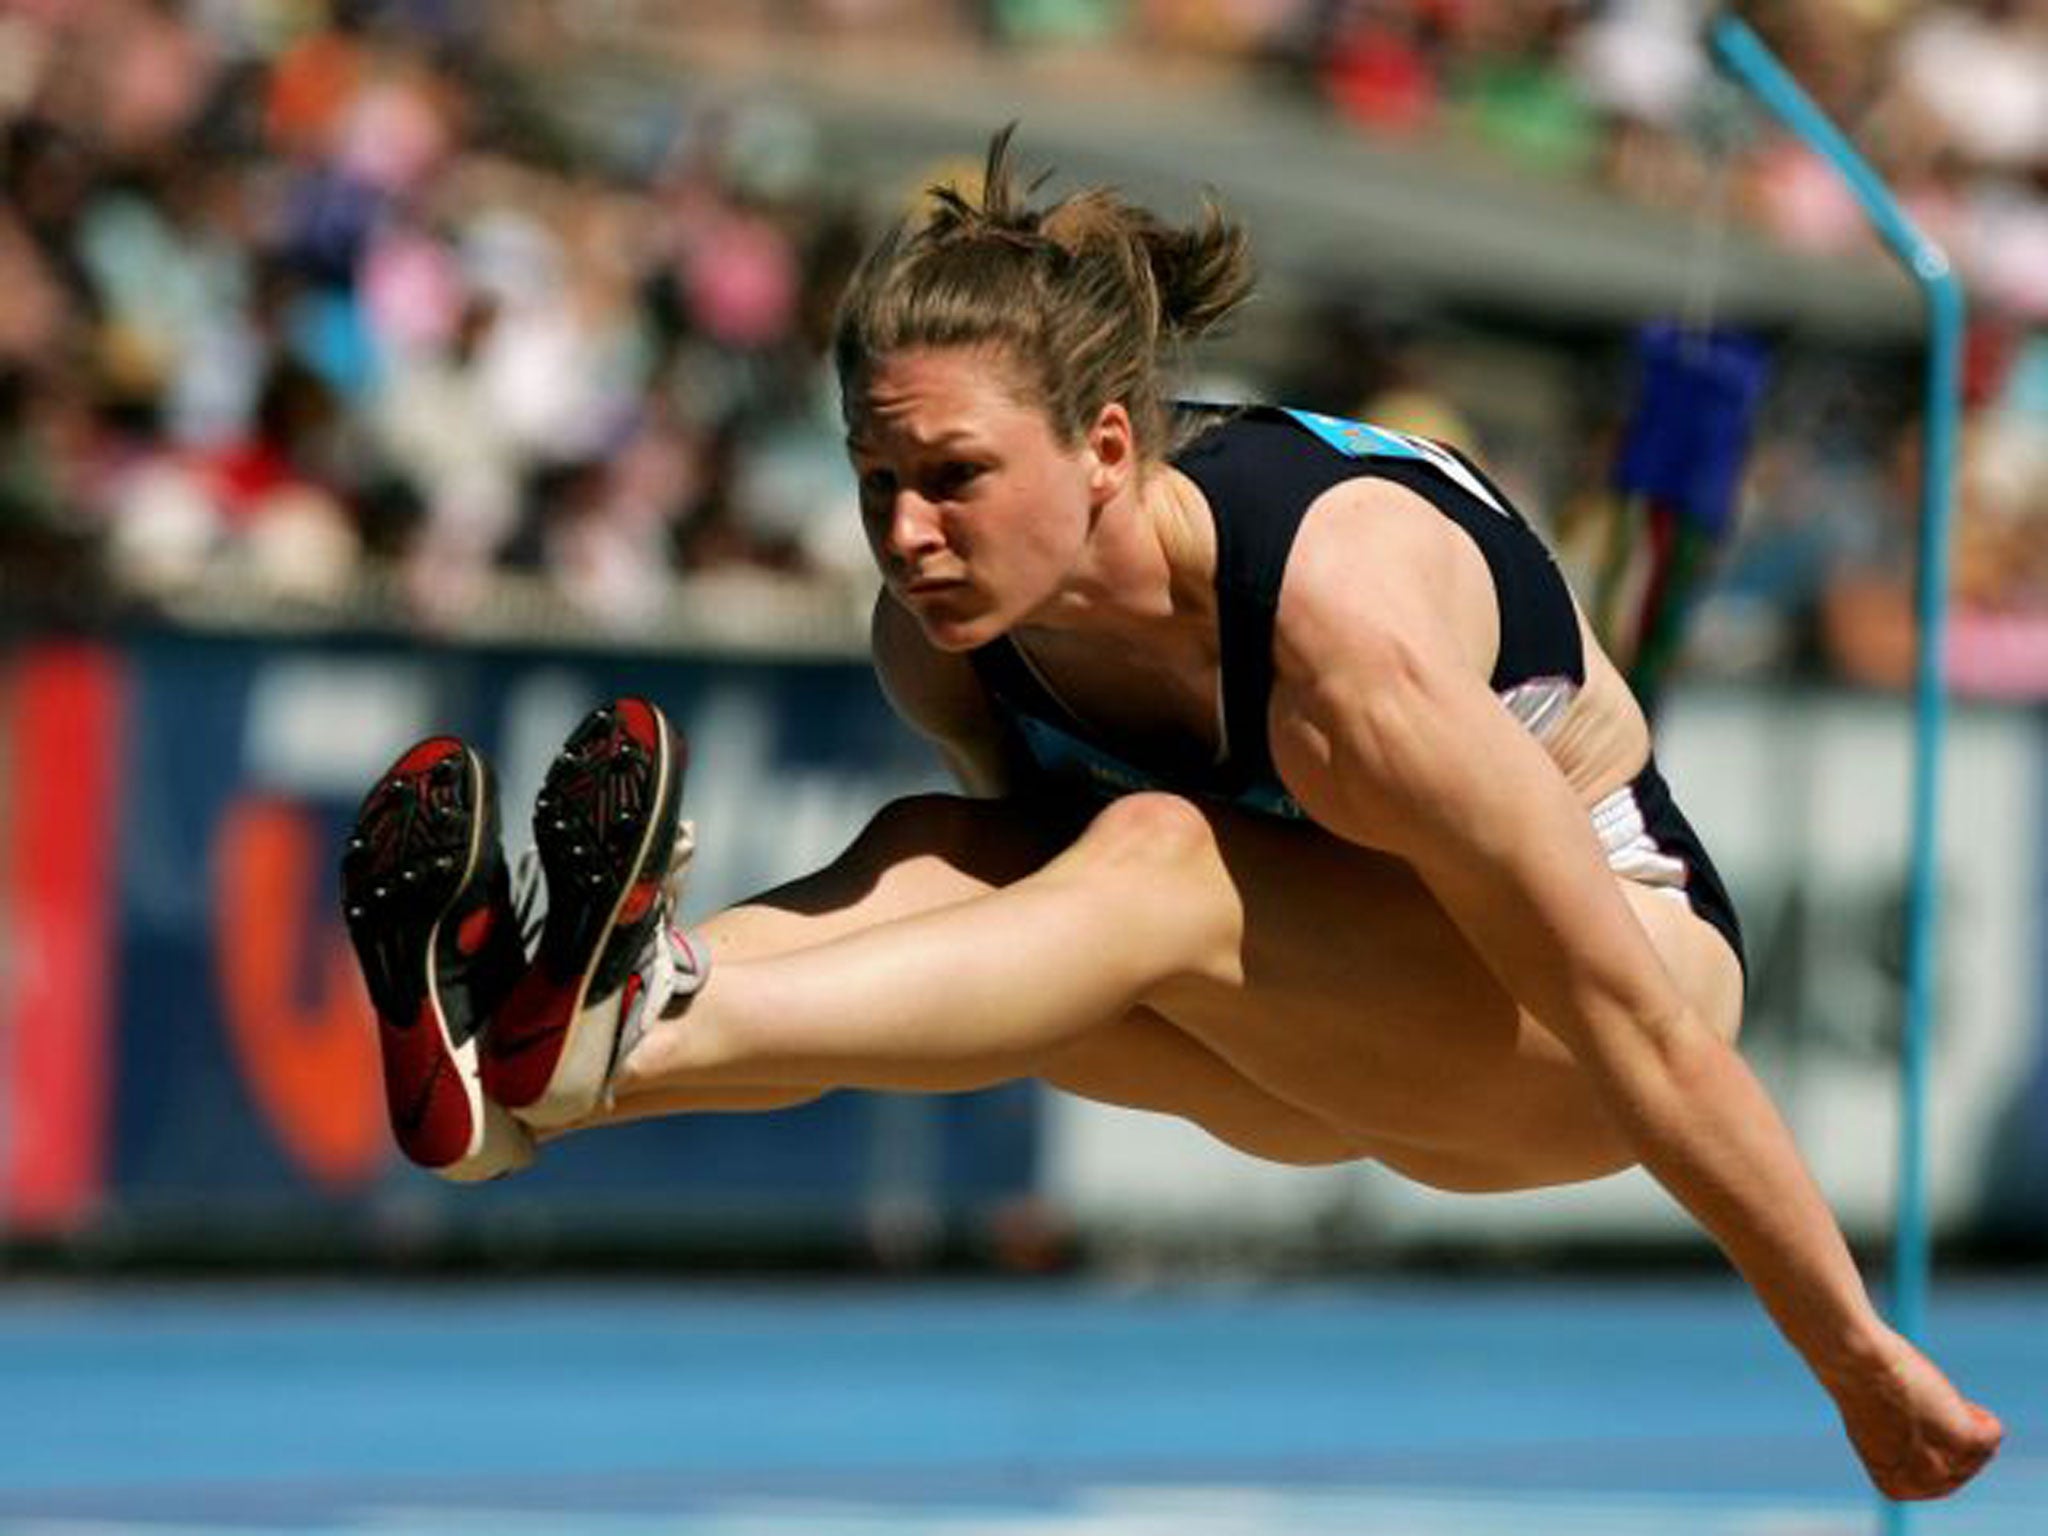 Feet first: Gillian Cooke competes in the long jump for Scotland at the 2006 Commonwealth Games in Melbourne